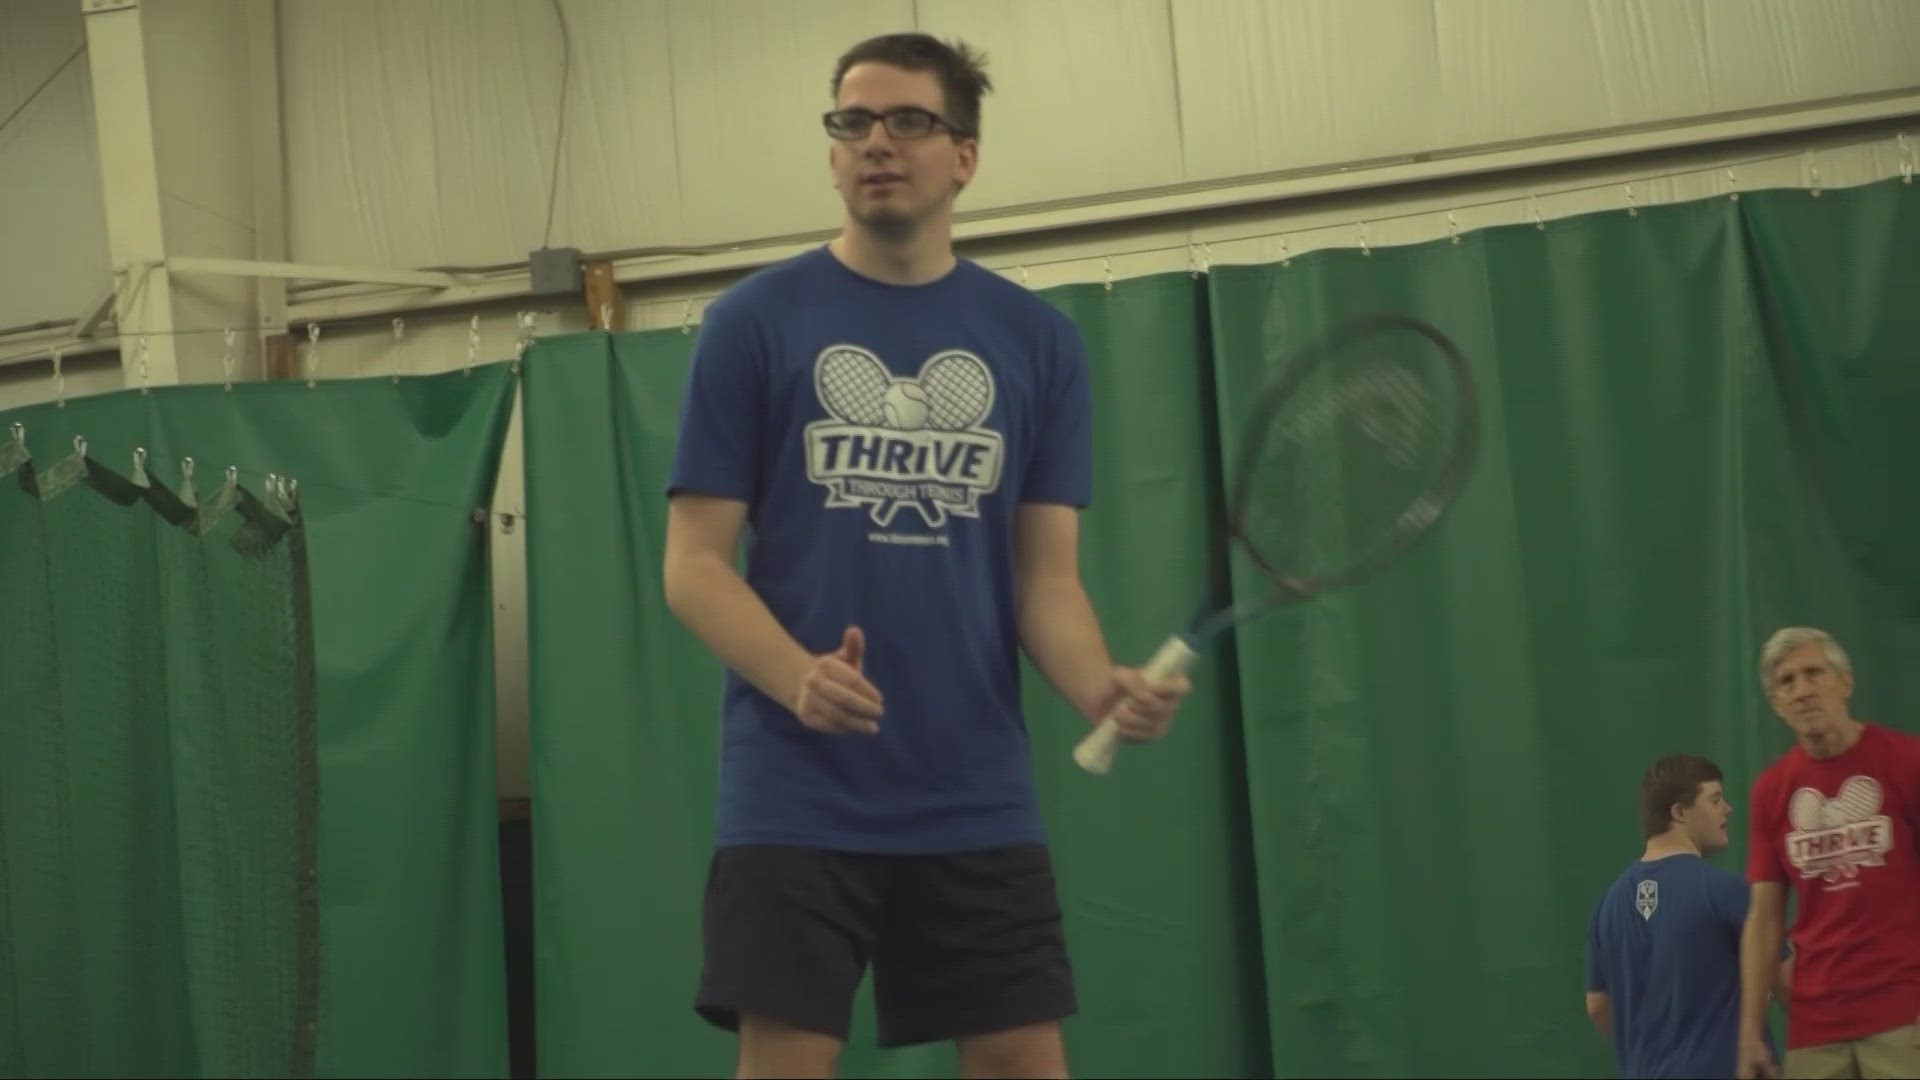 In the latest edition of Power of Inspiration, Jay Crawford and Matt Kaulig explore the Thrive Through Tennis program.